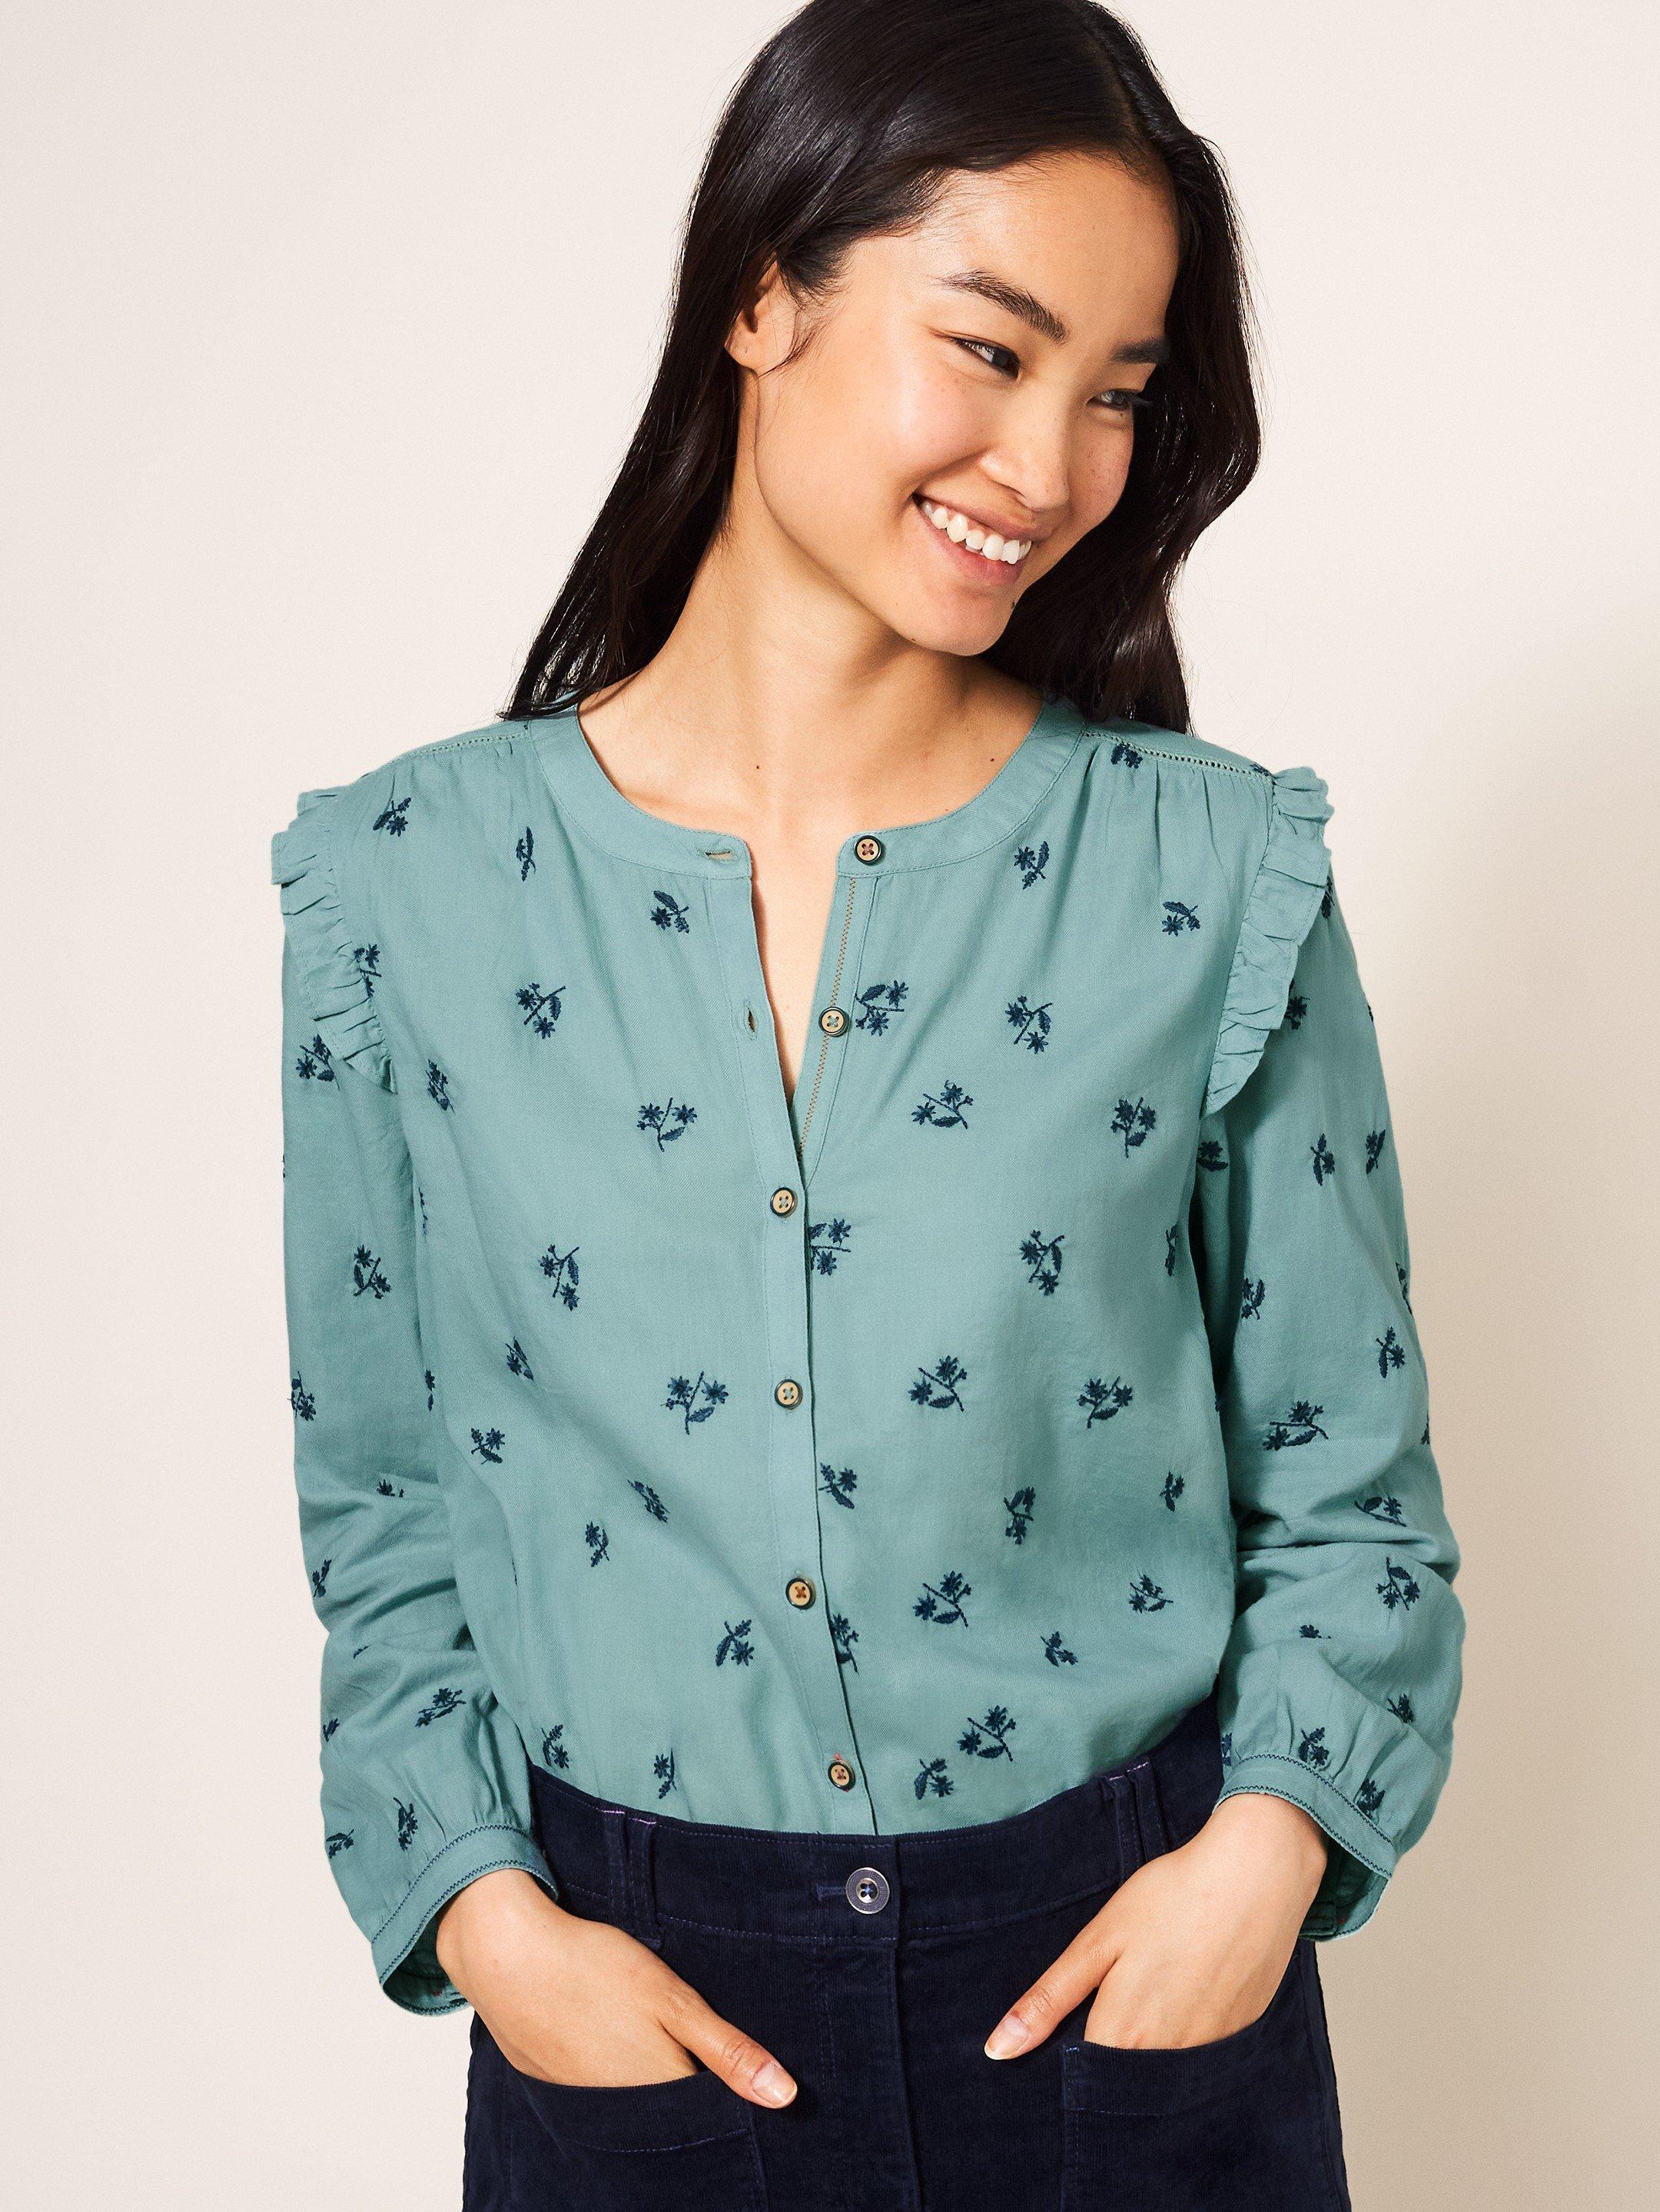 Florine Embroidered Shirt in TEAL MLT - LIFESTYLE